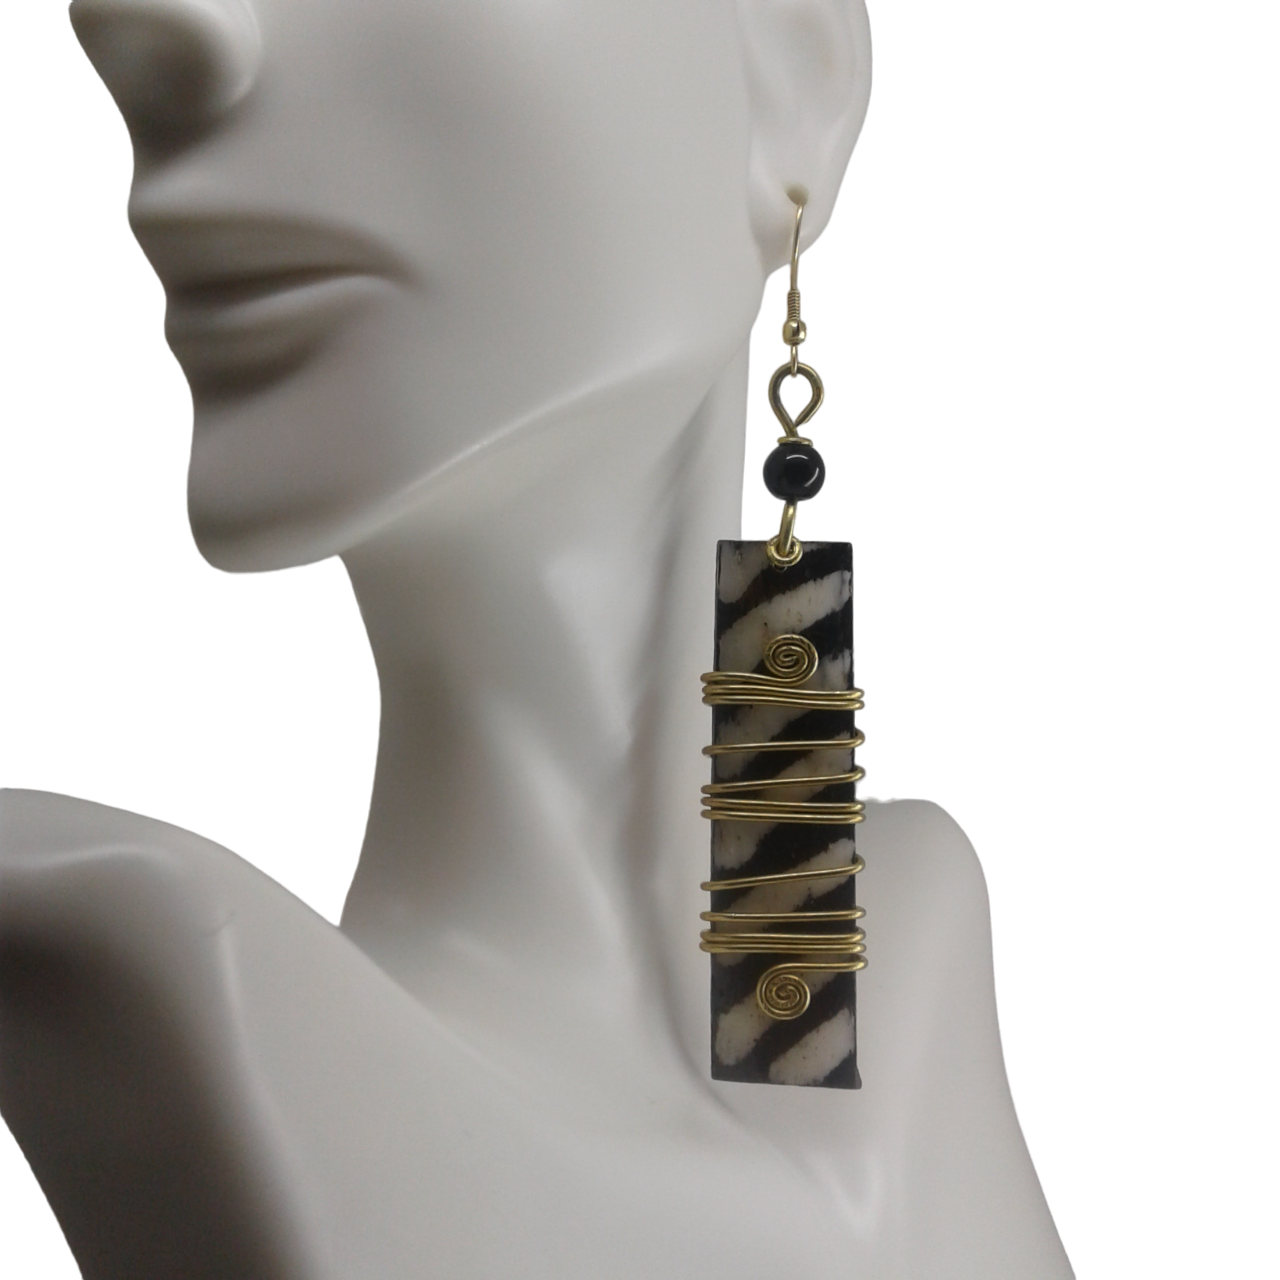 Black, white and gold earrings